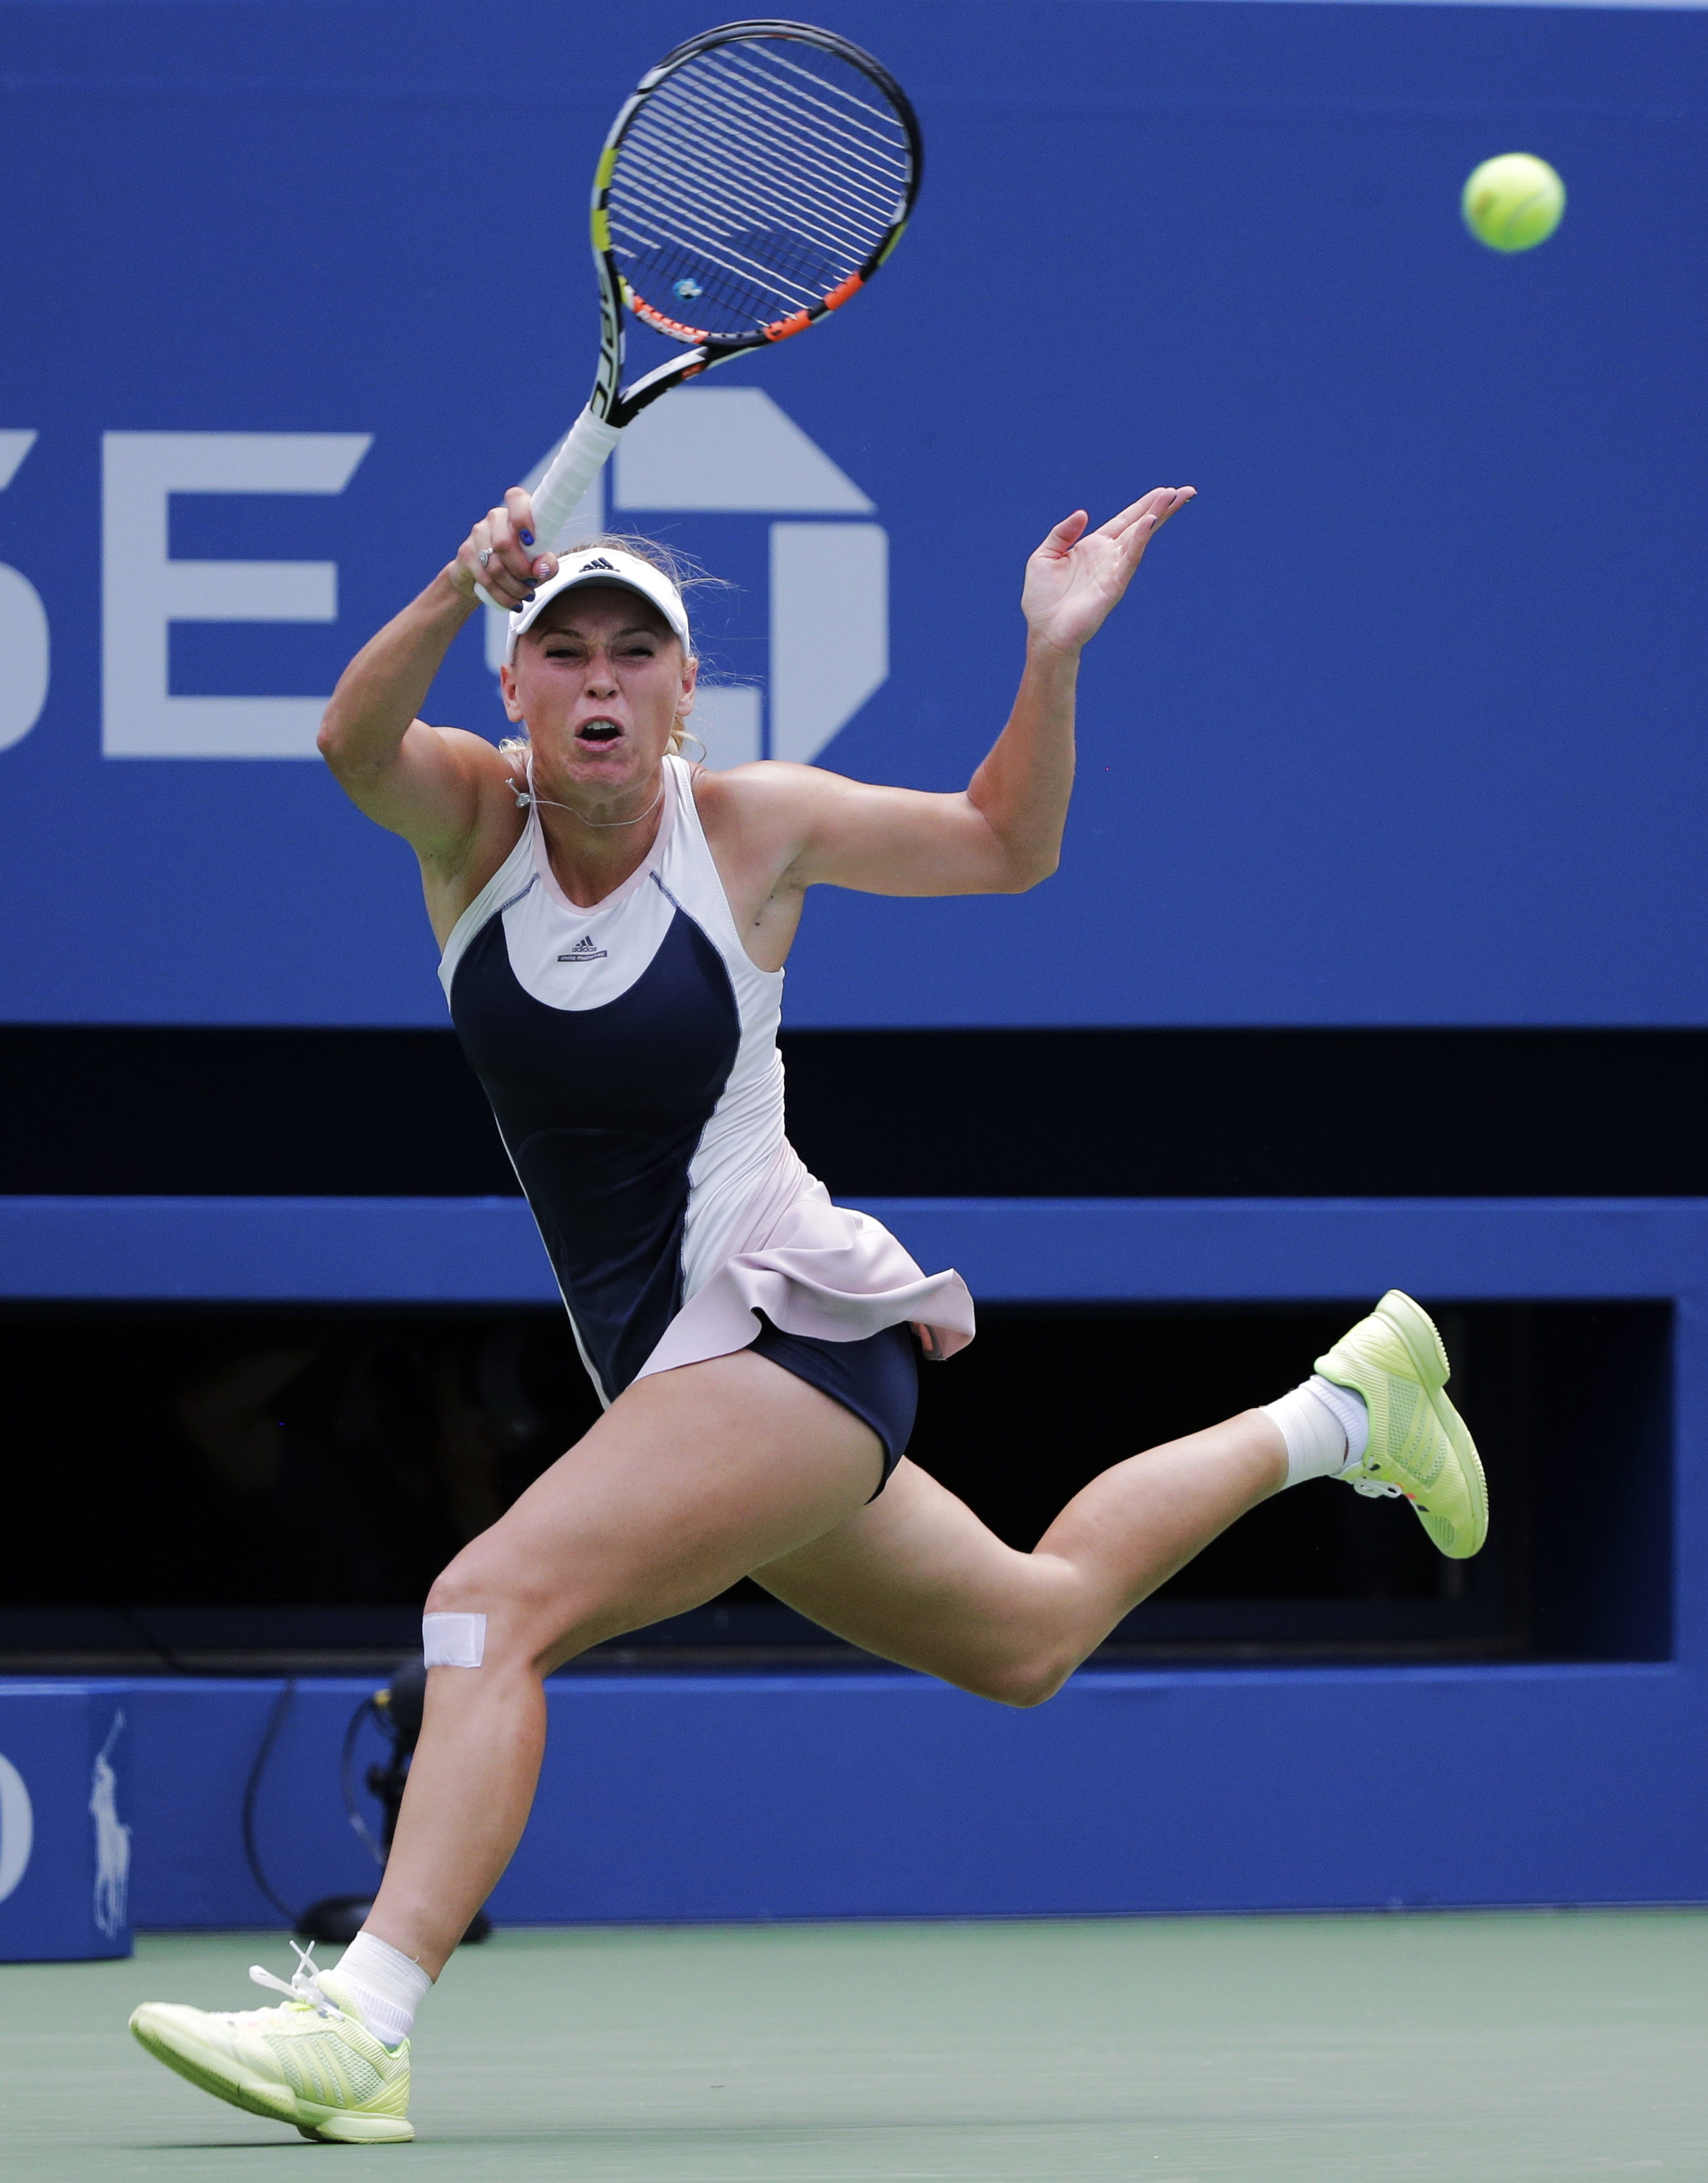 Caroline Wozniacki, of Denmark, returns a shot to Jamie Loeb, of the United States, during the first round of the US Open tennis tournament, Tuesday, Sept. 1, 2015, in New York. PHOTO: AFP